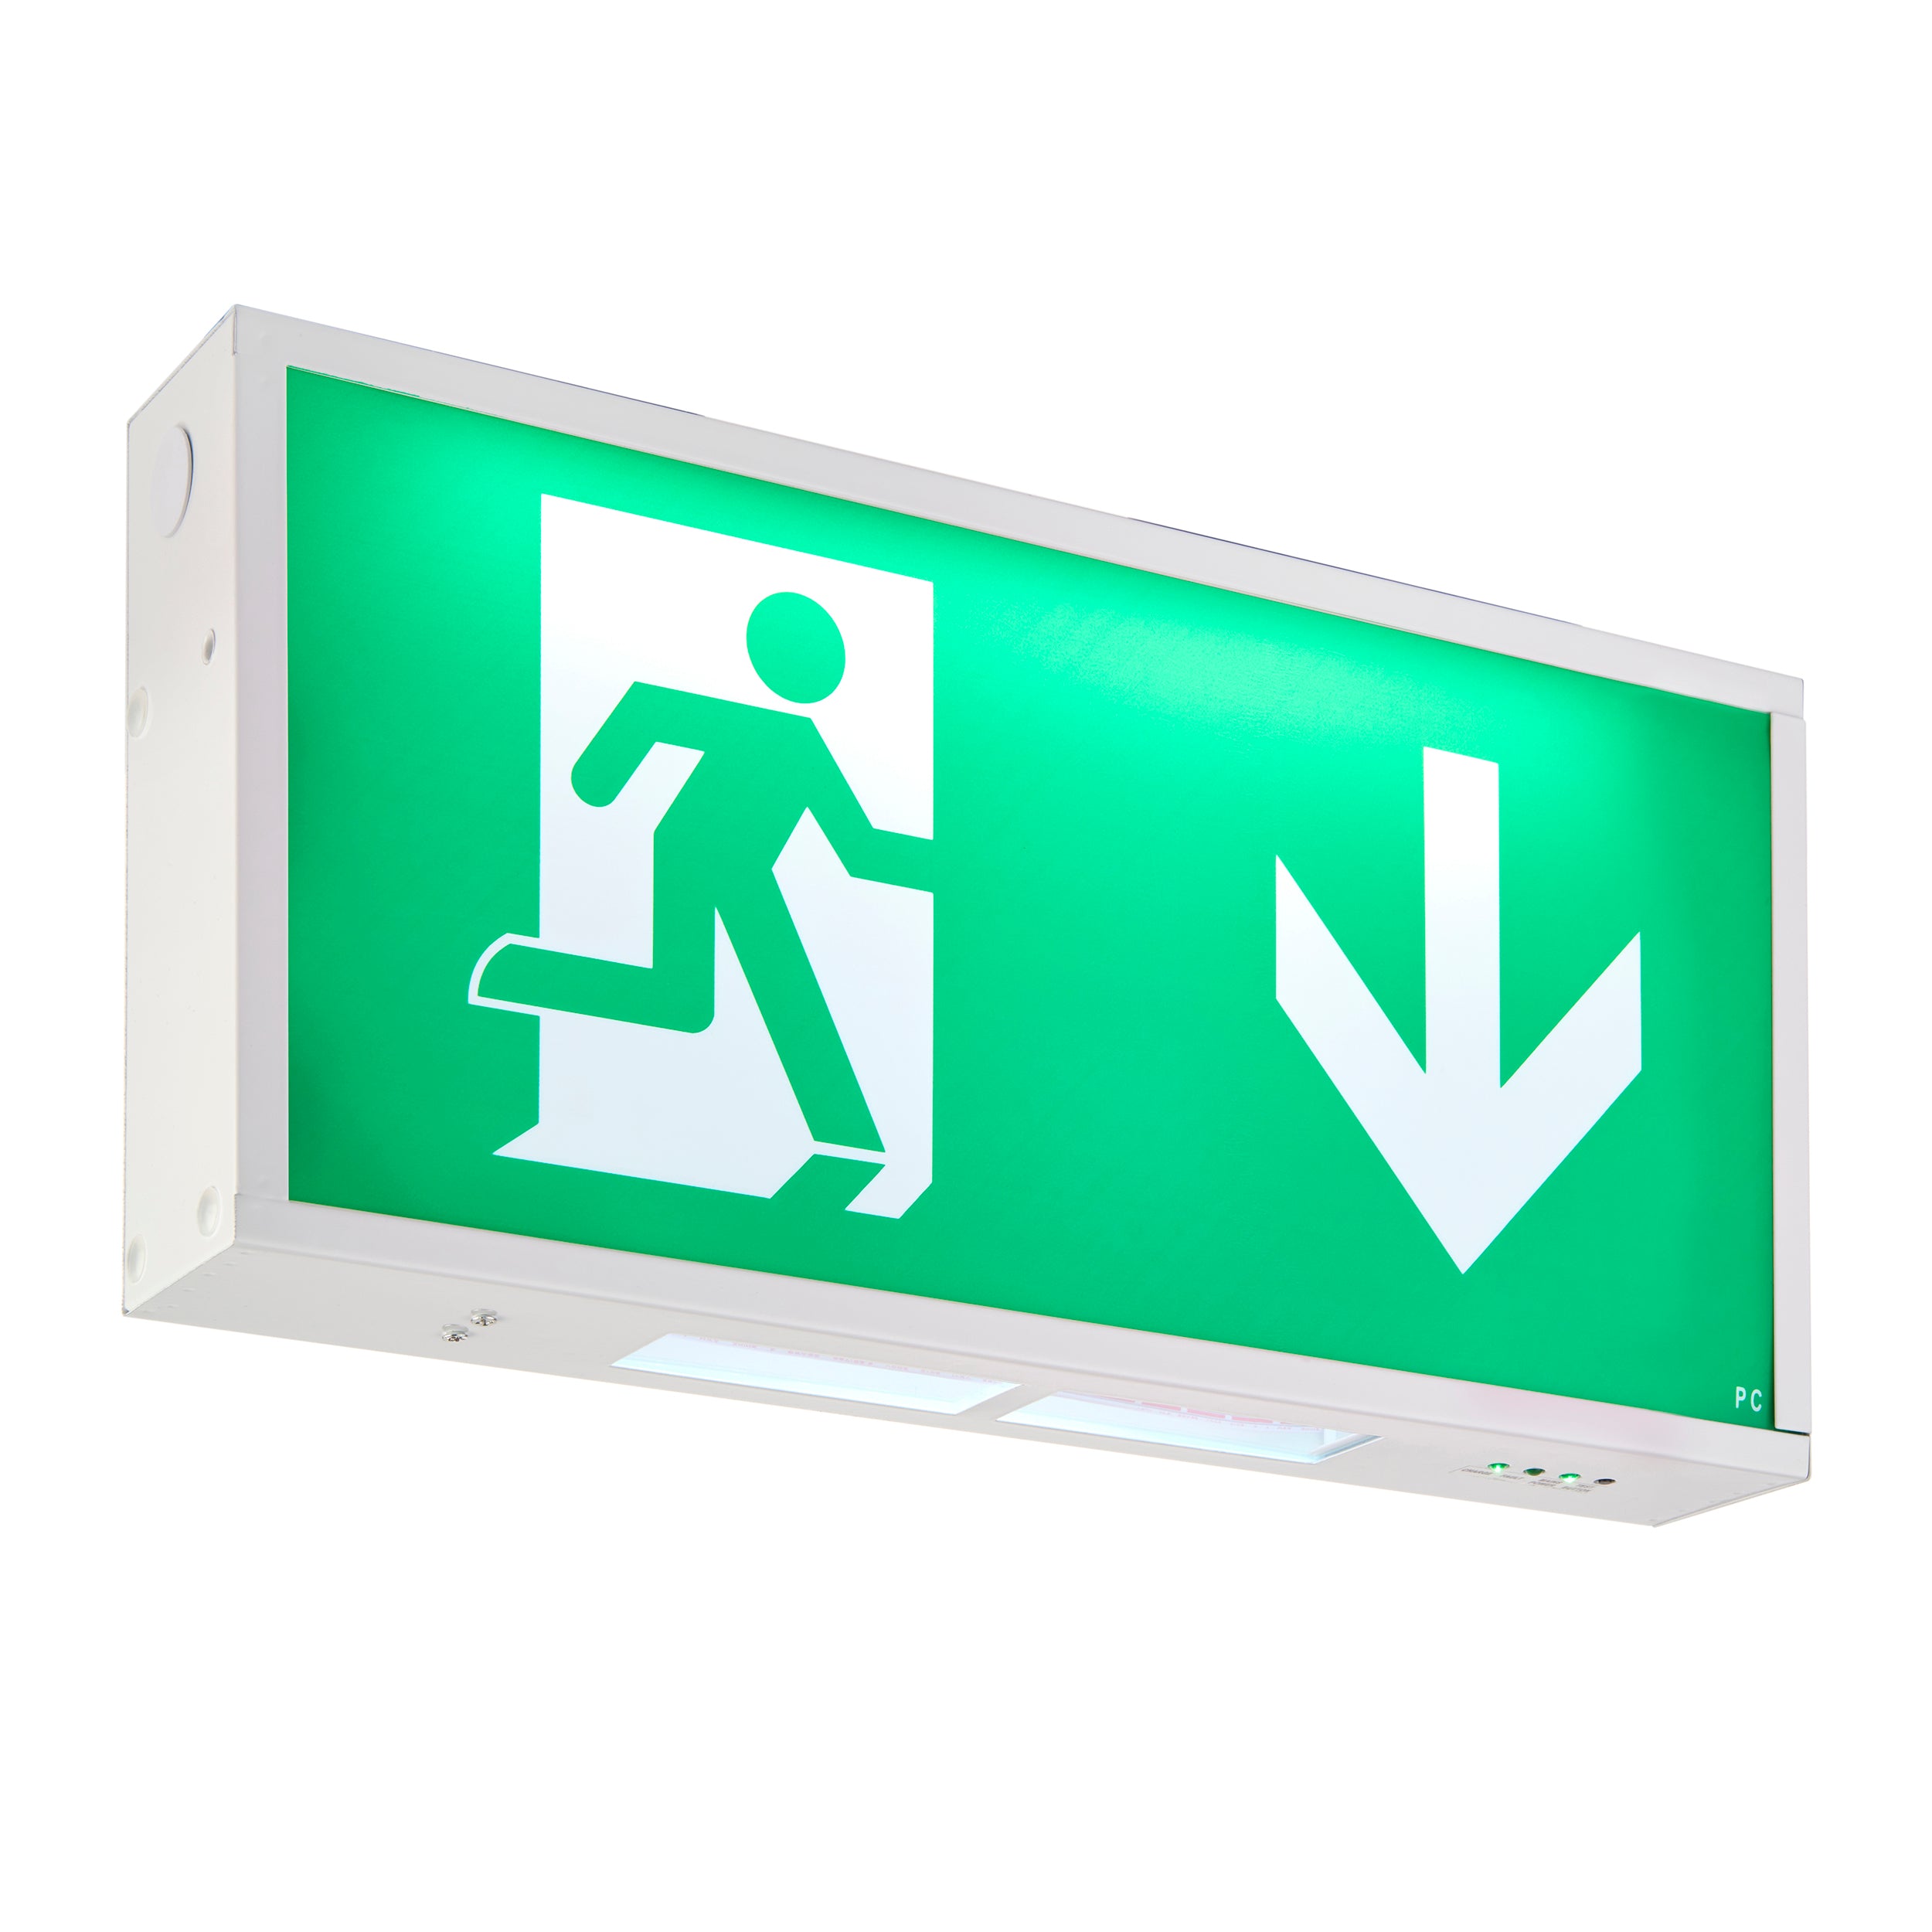 Sight Box Emergency Exit With Self Test 4.5W